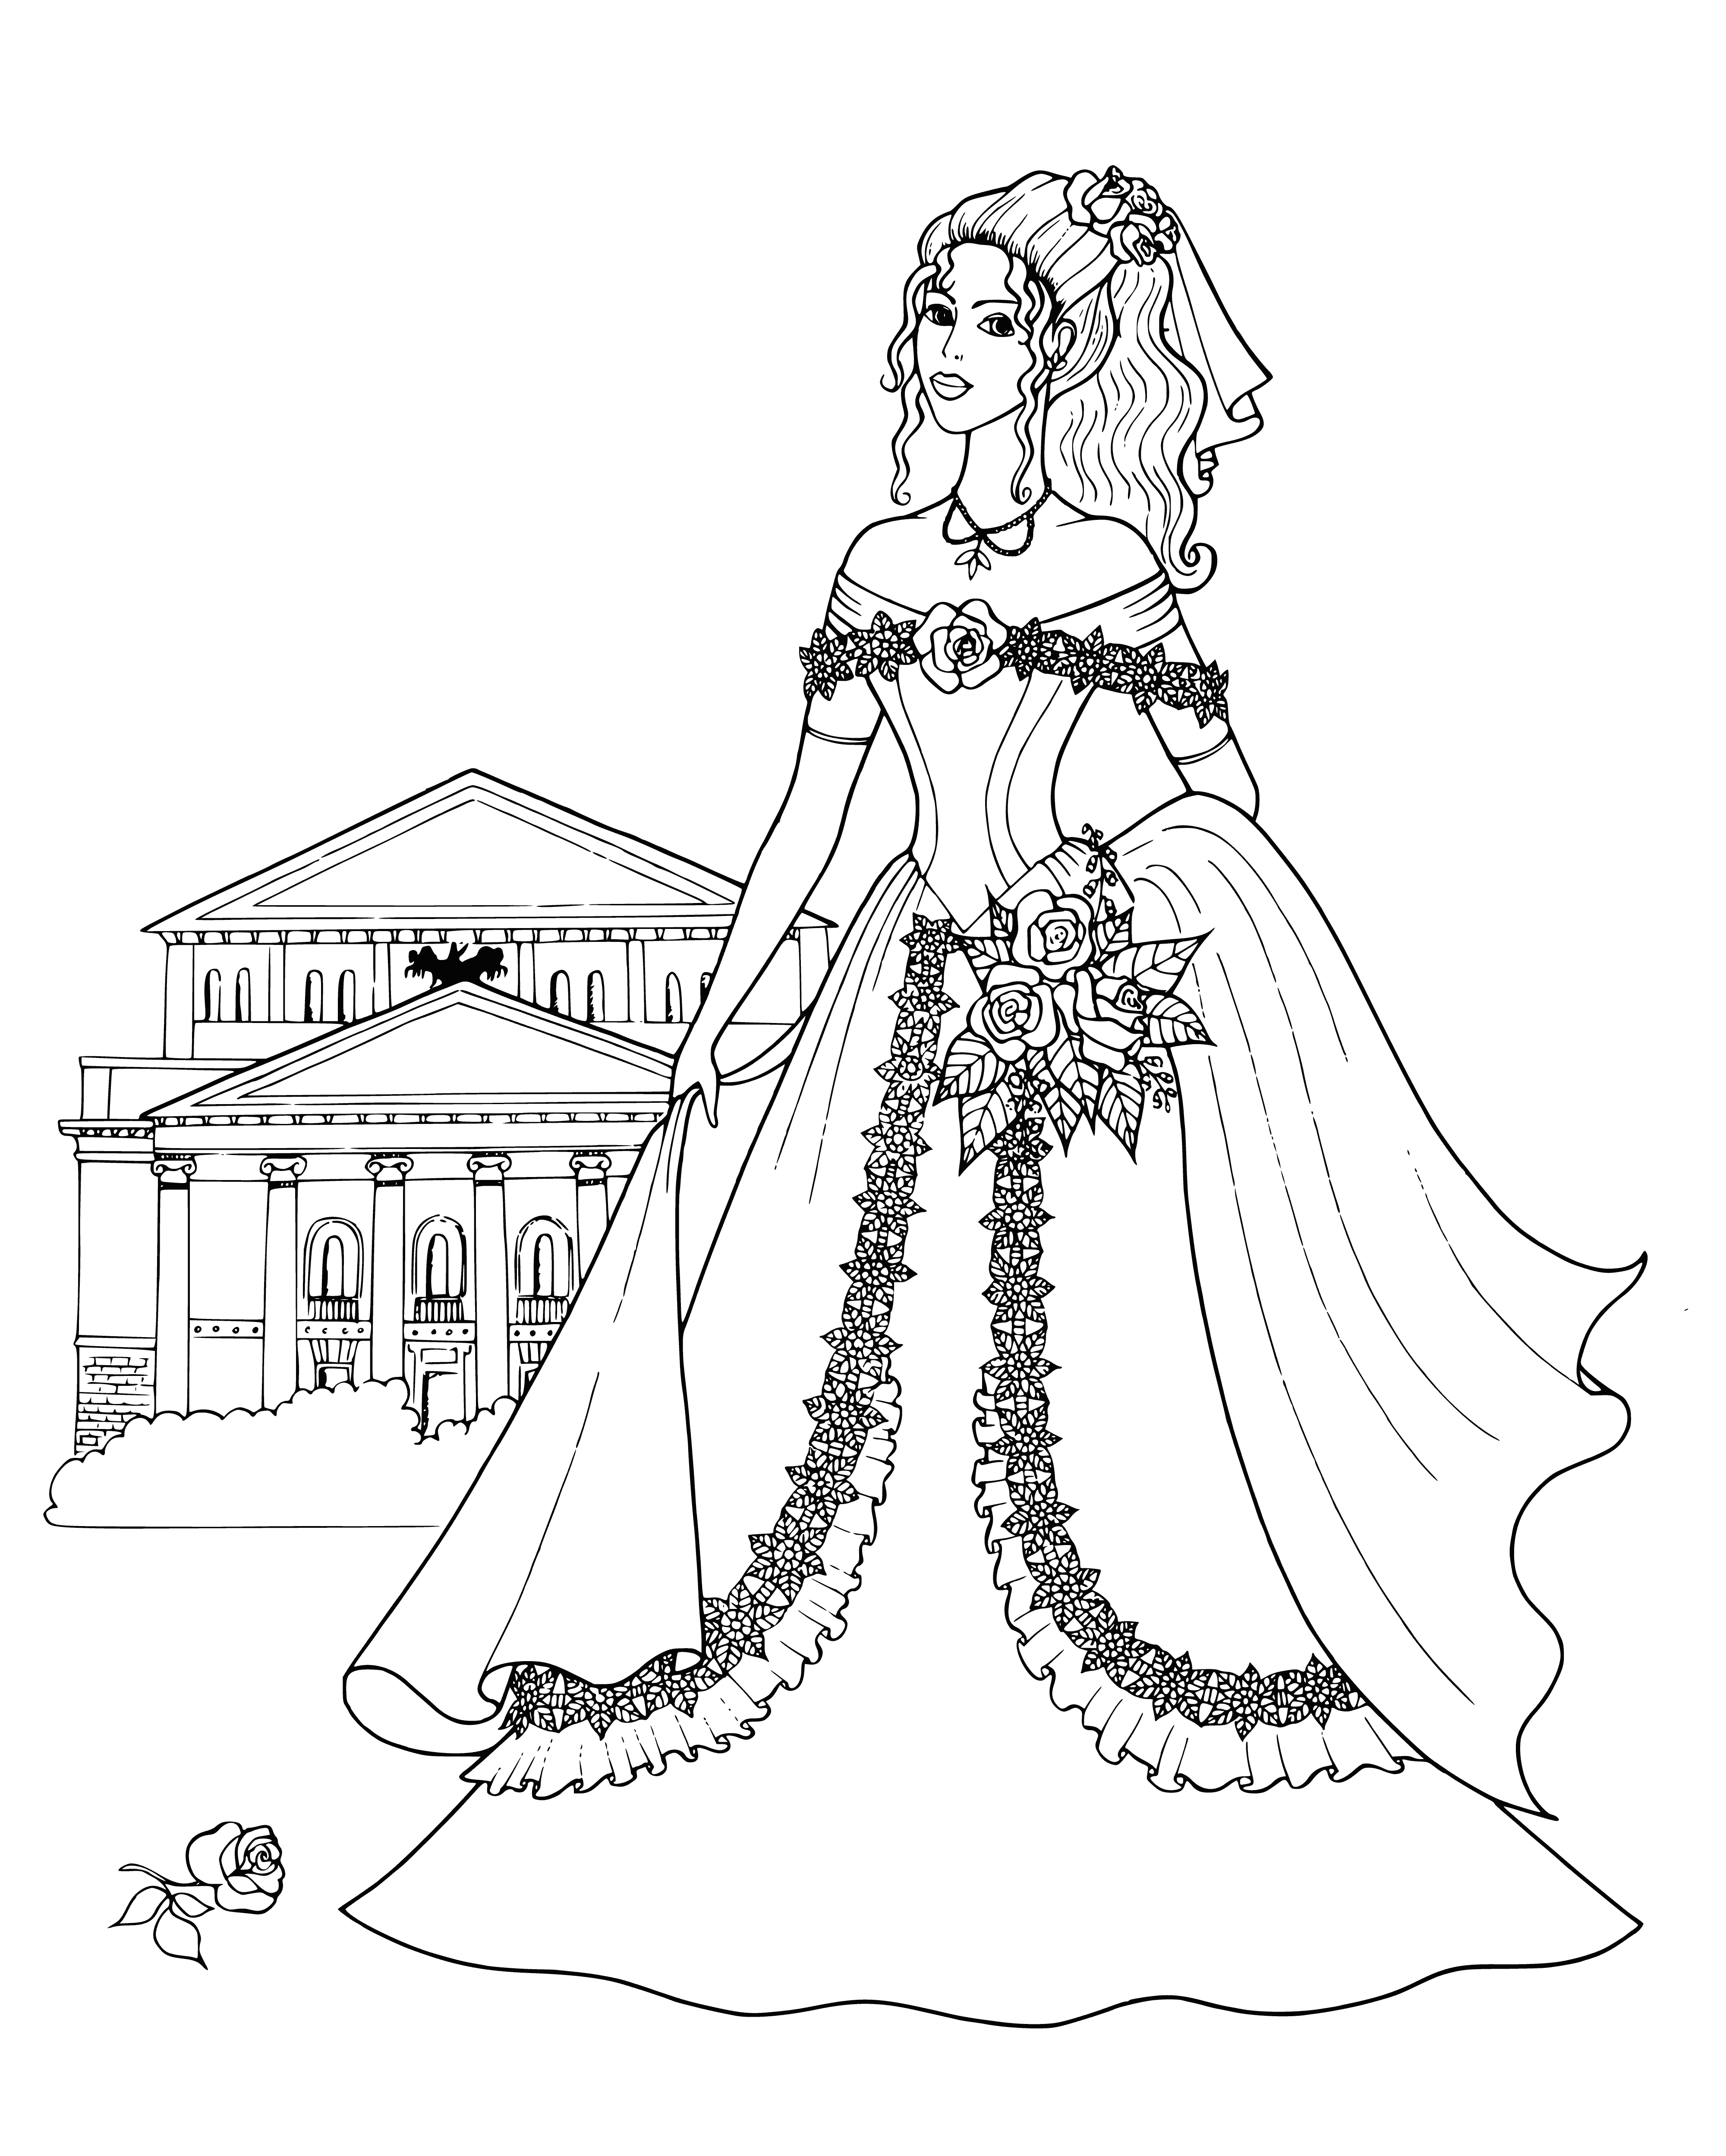 coloring page: Princess holds bouquet, wears white dress & crown, has blonde hair & blue eyes.